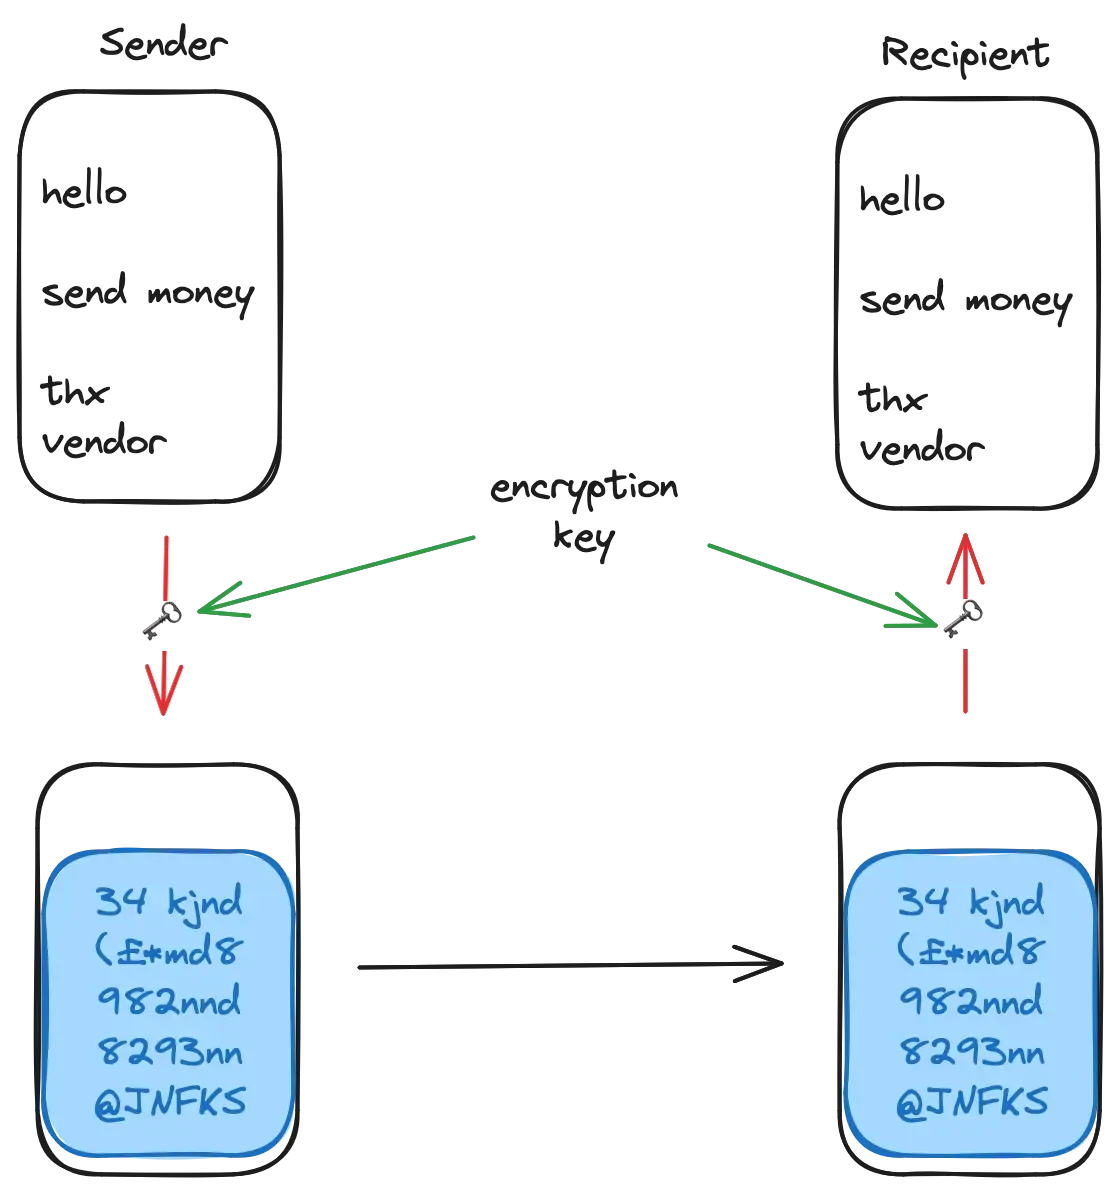 Chart describing the process of encrypting email. Sender writes email, email gets encrypted using a key, encrypted email gets sent across, recipient decrypts email using same key, recipient reads email.